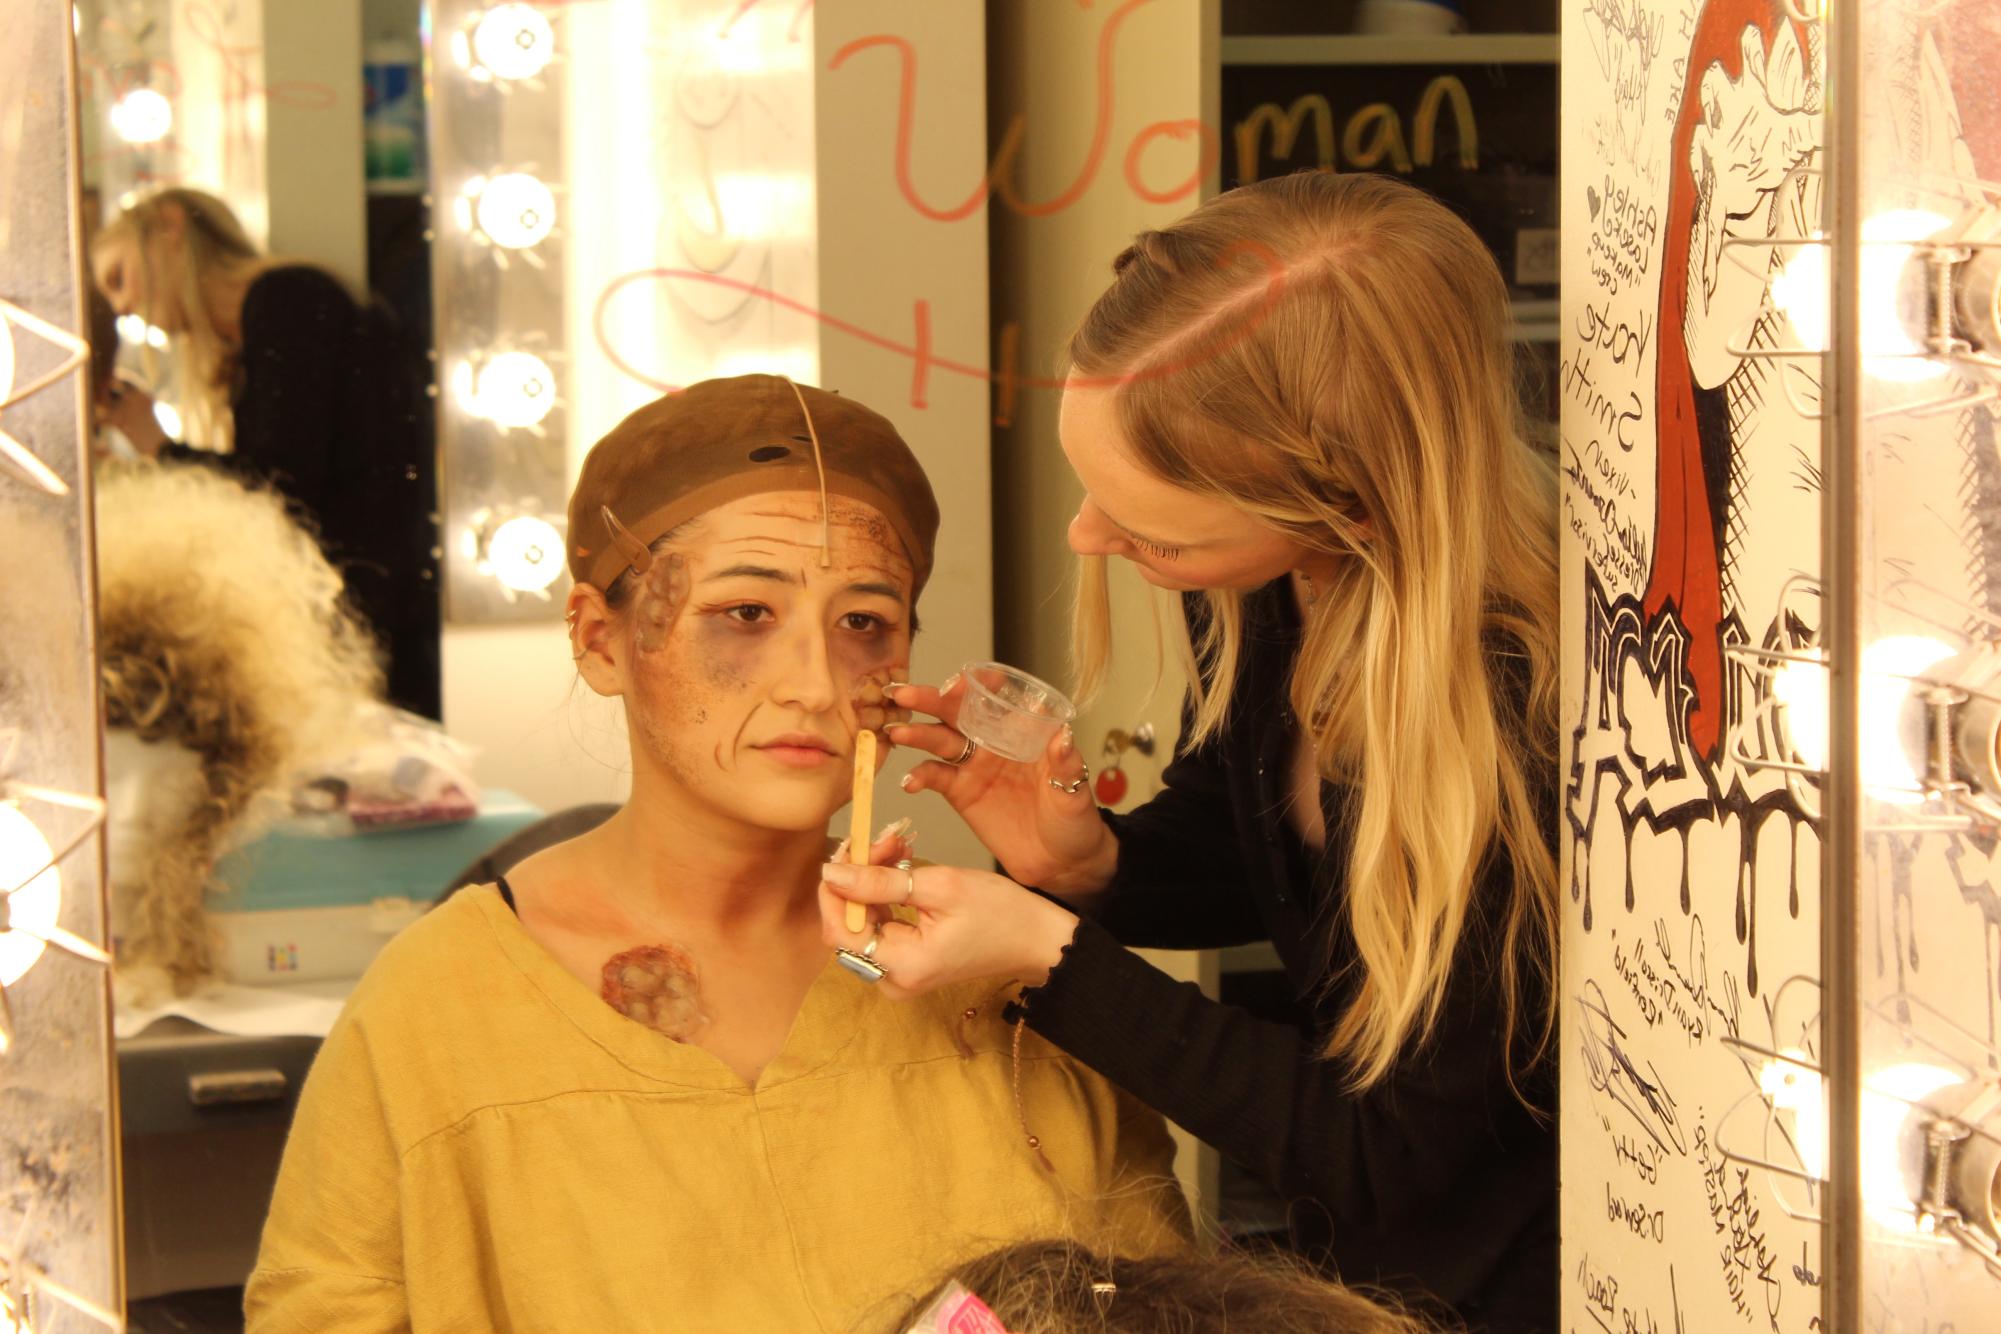 Makeup designer Nola Cannon applying makeup to Luna Aguilar (Beggar Woman) on the opening night of "Sweeney Todd; The Demon Barber of Fleet Street" on March 14, 2024.